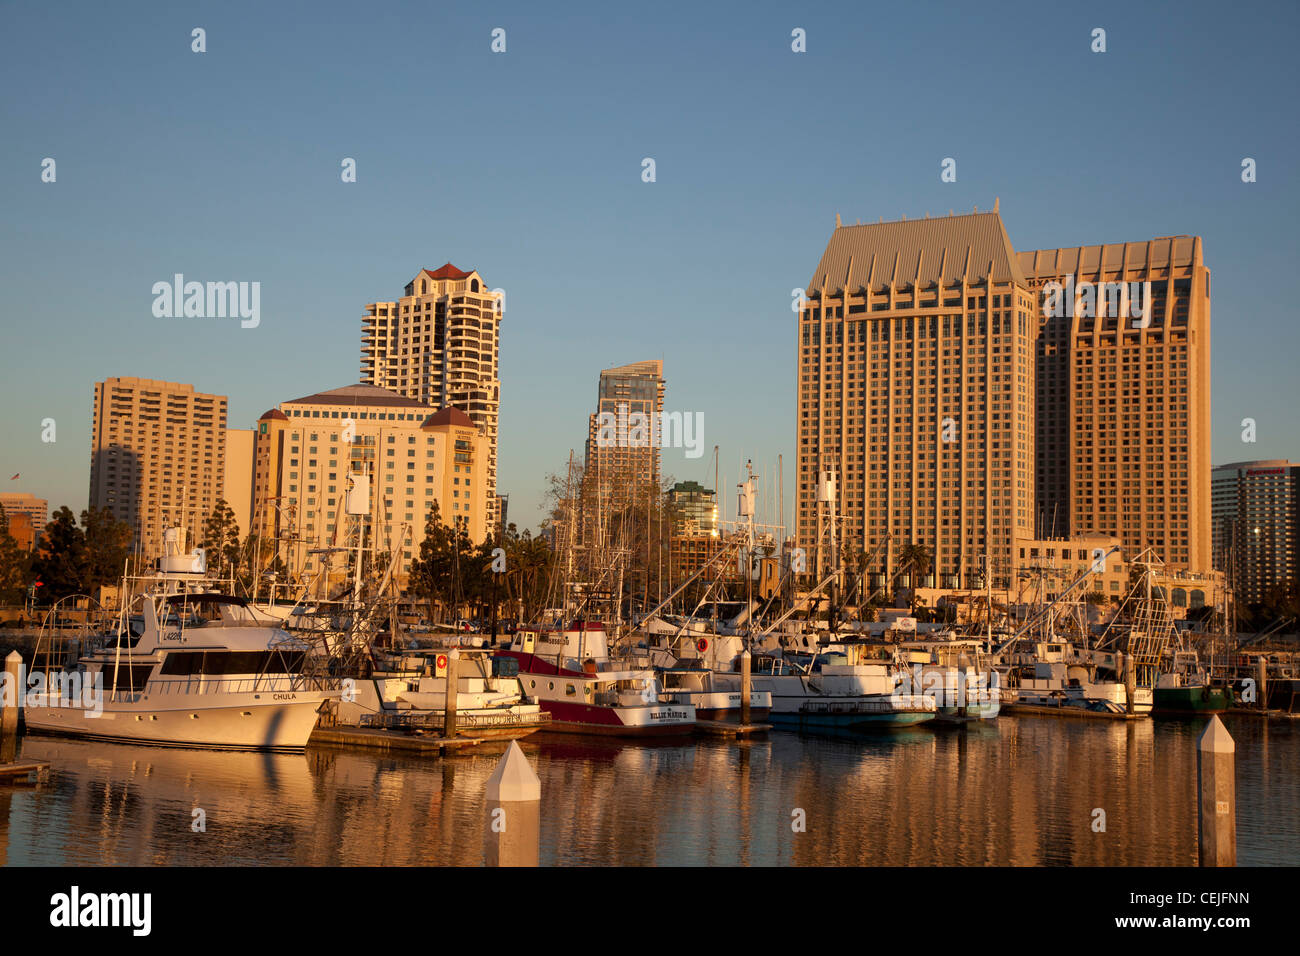 San Diego, California - Tuna Harbor and hotels in downtown San Diego. Stock Photo